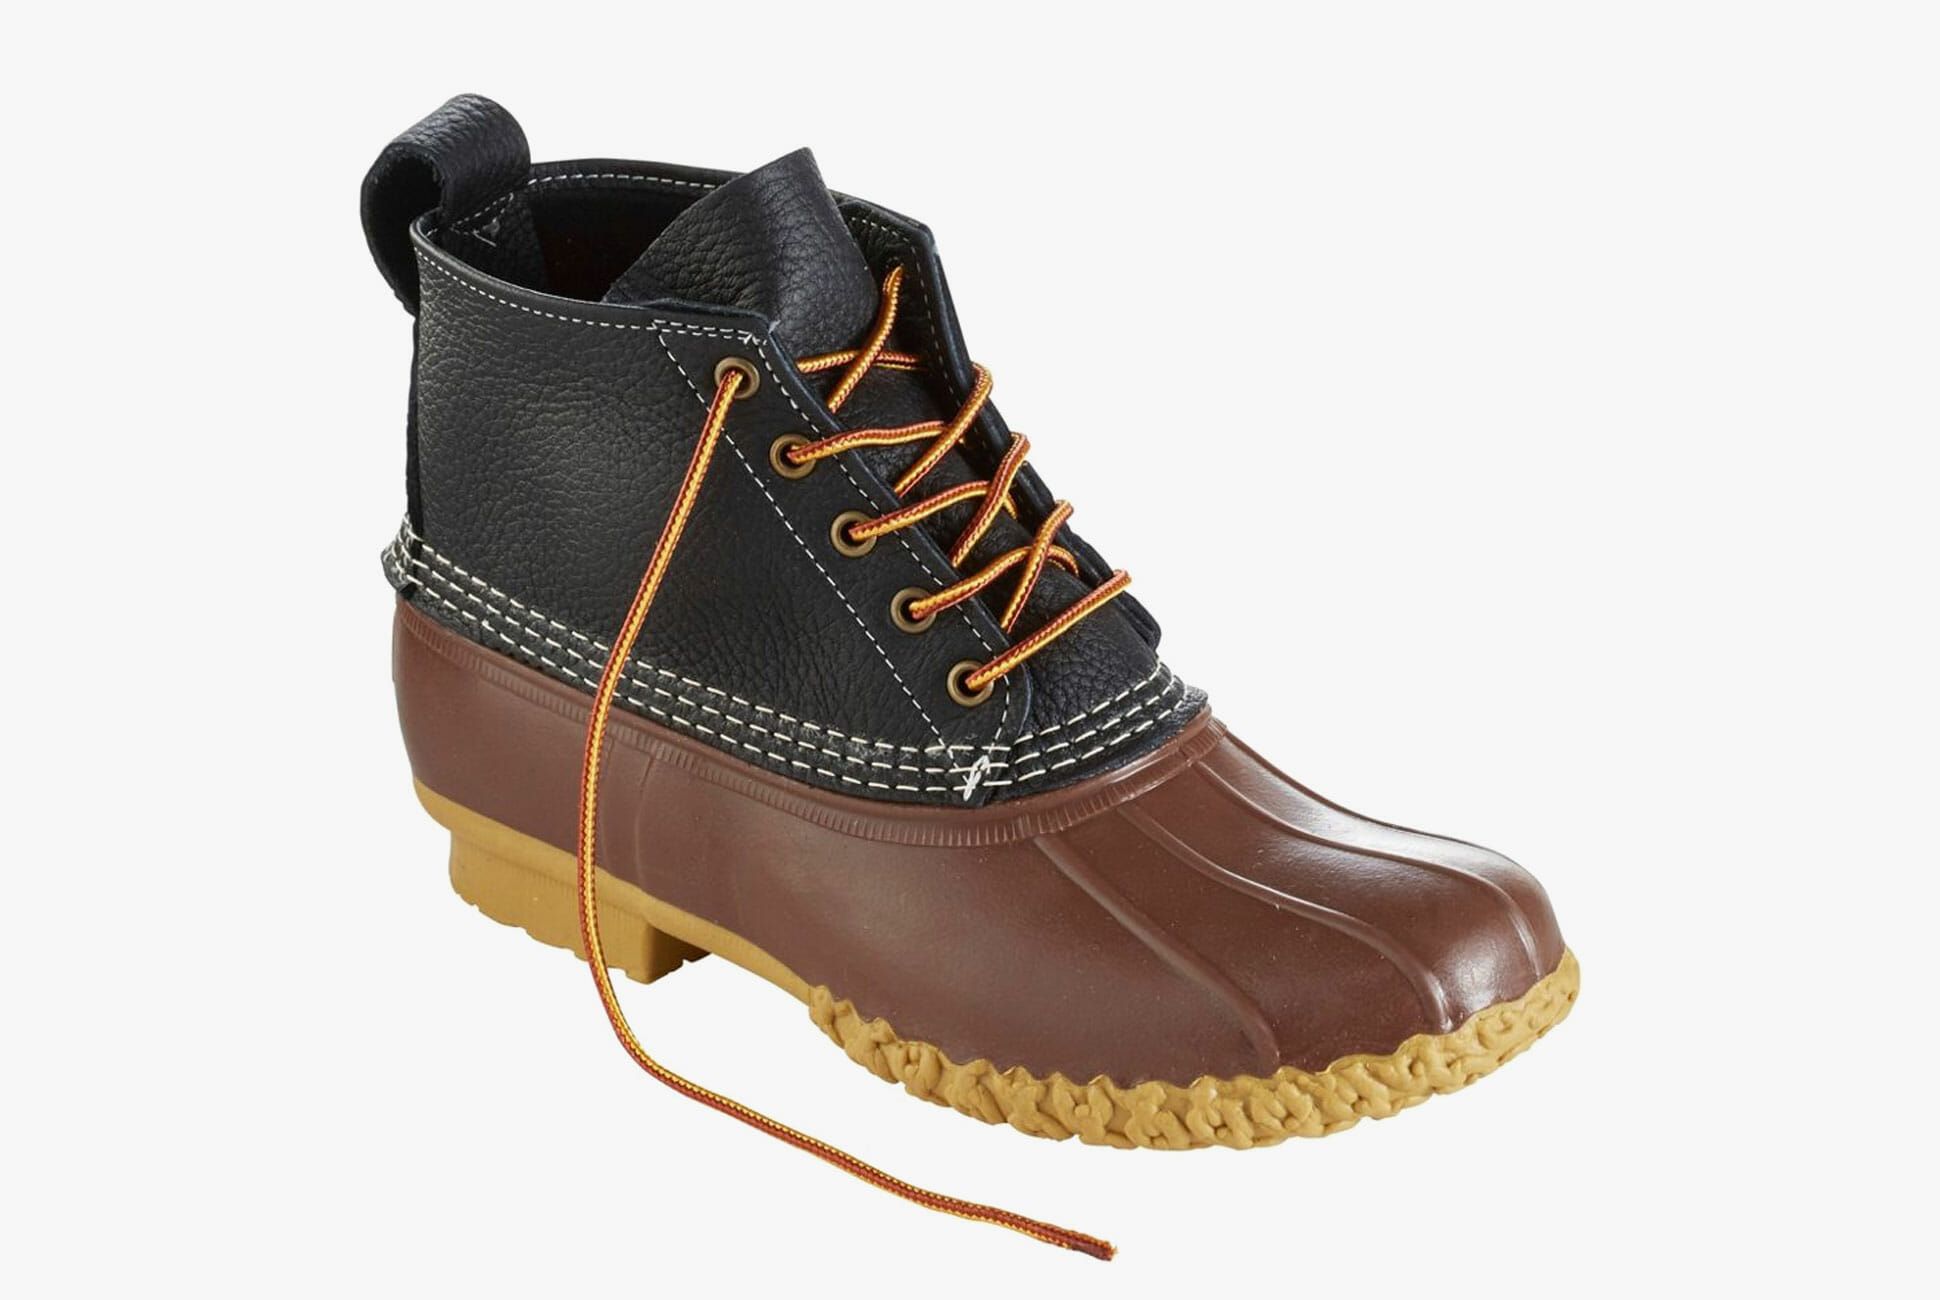 duck boots on sale